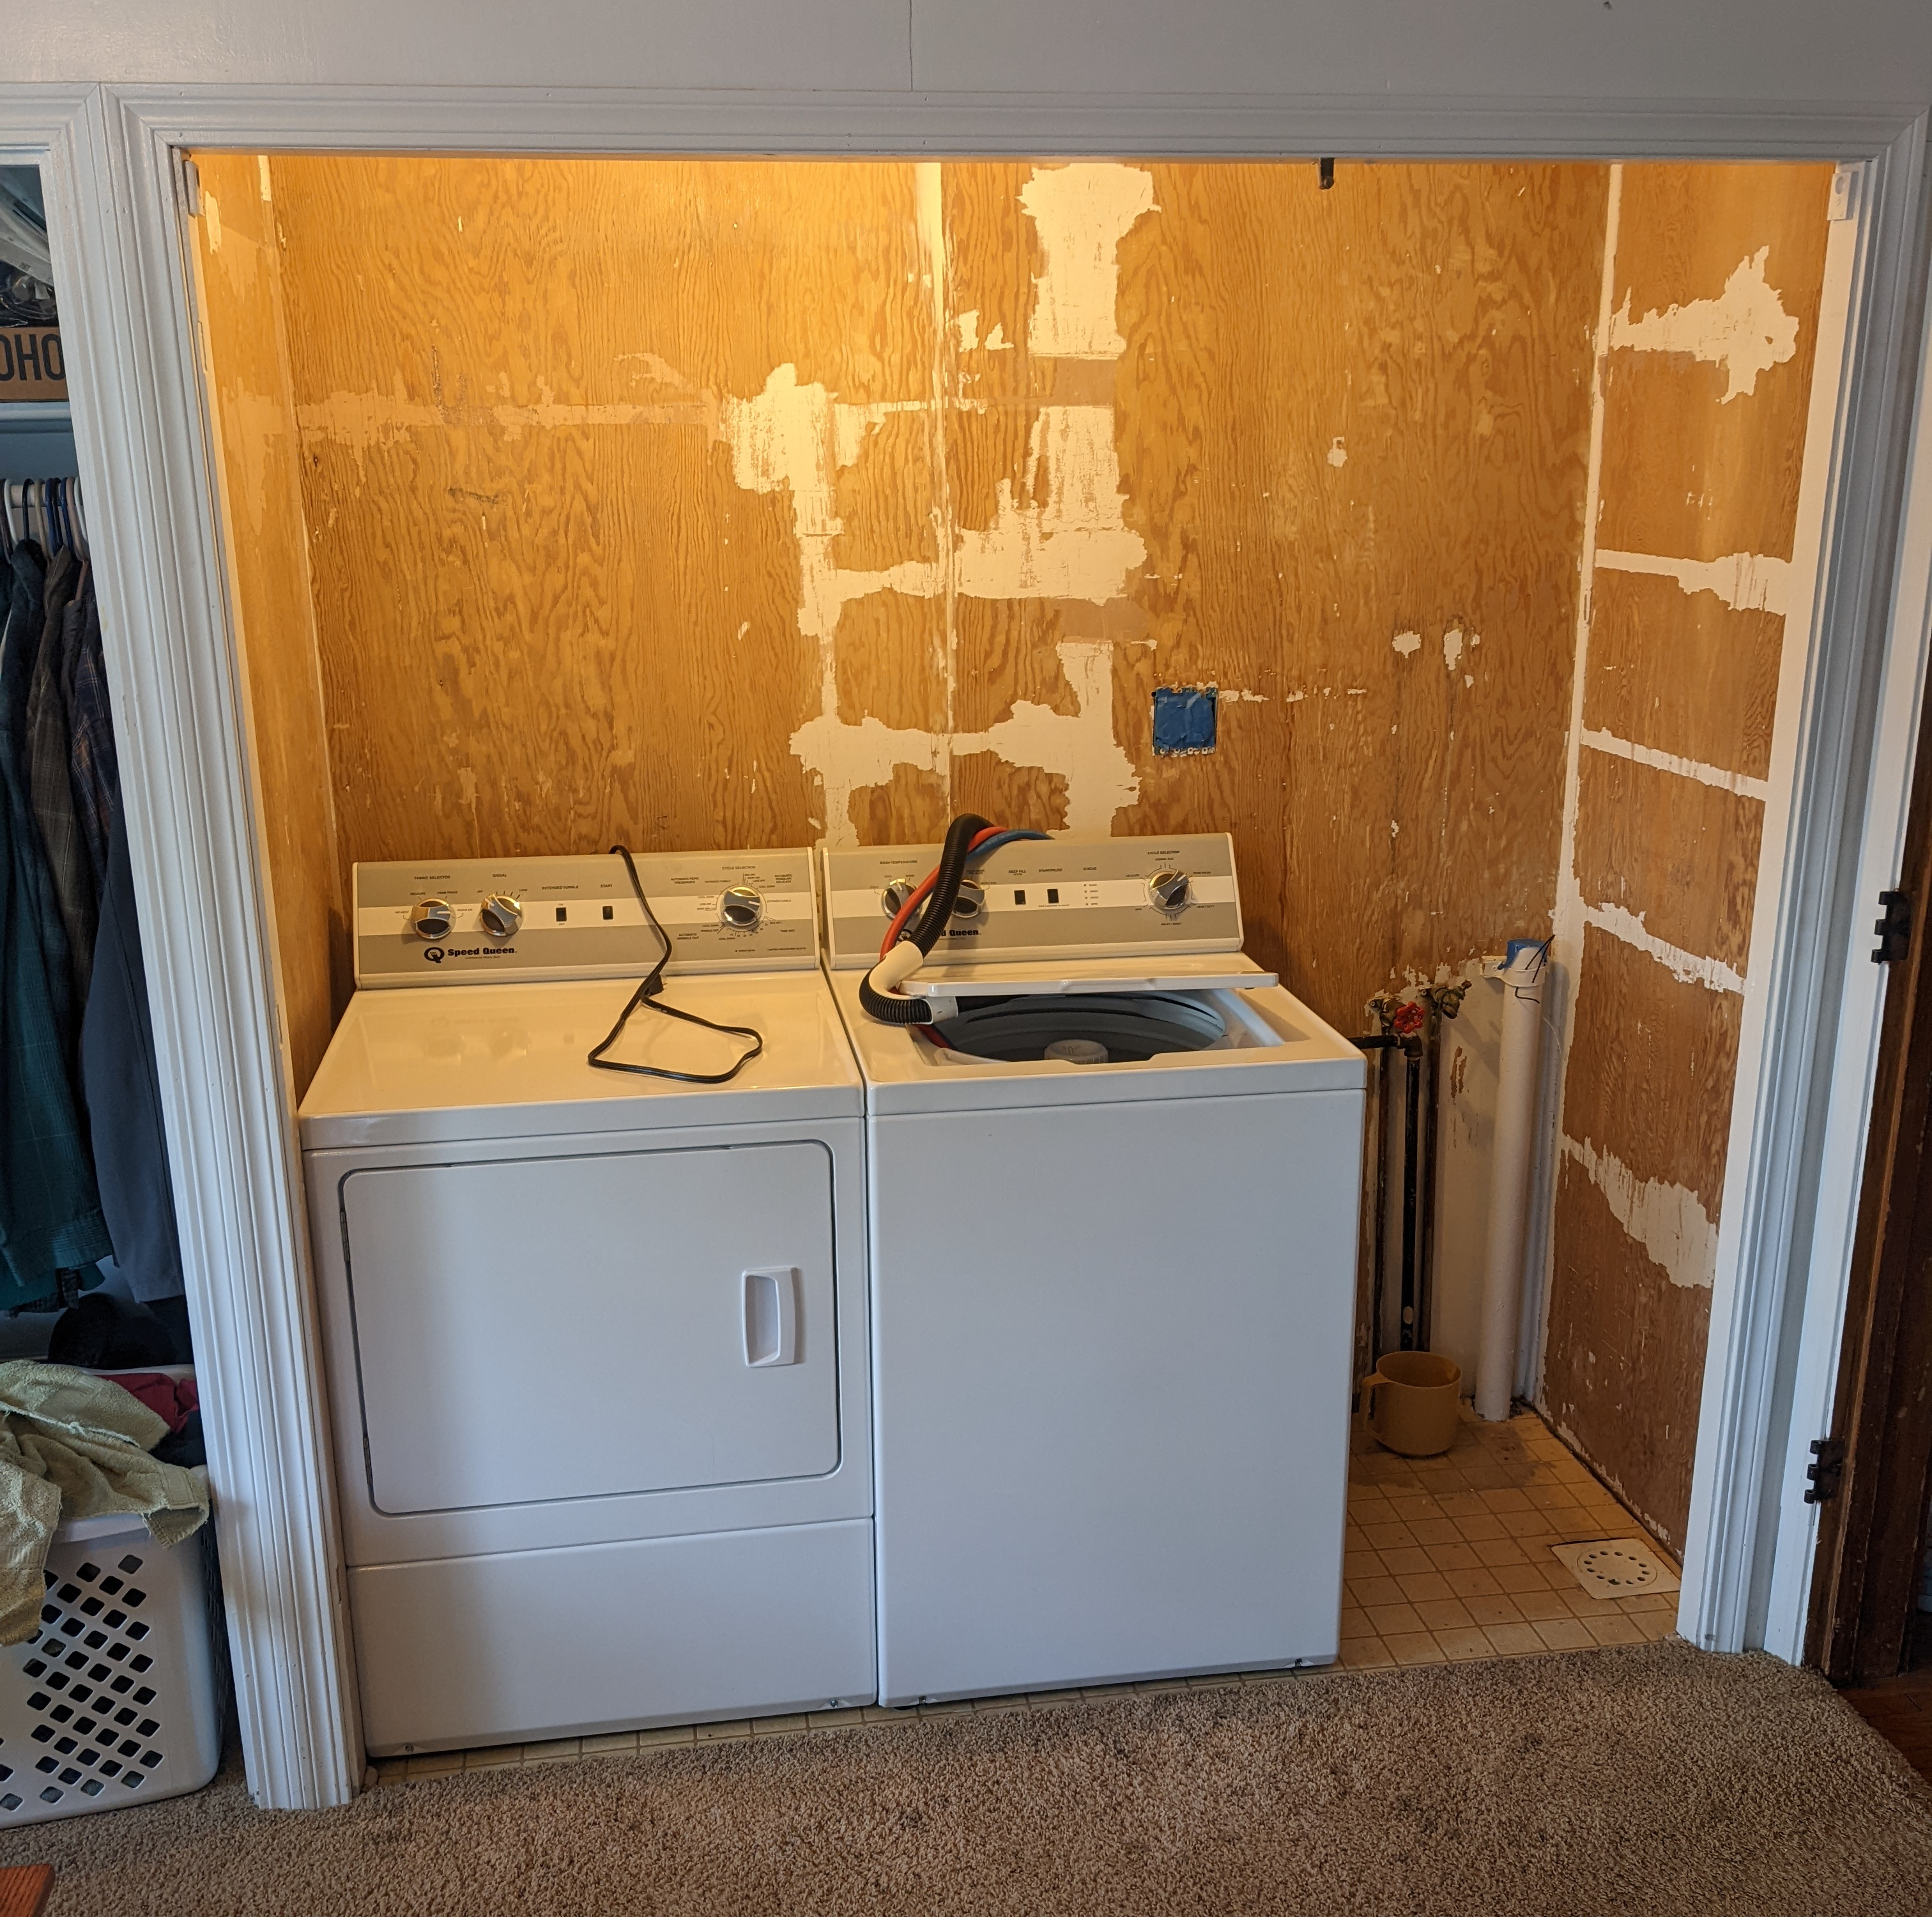 The laundry area closet after ripping out the old shelves and stripping the paint